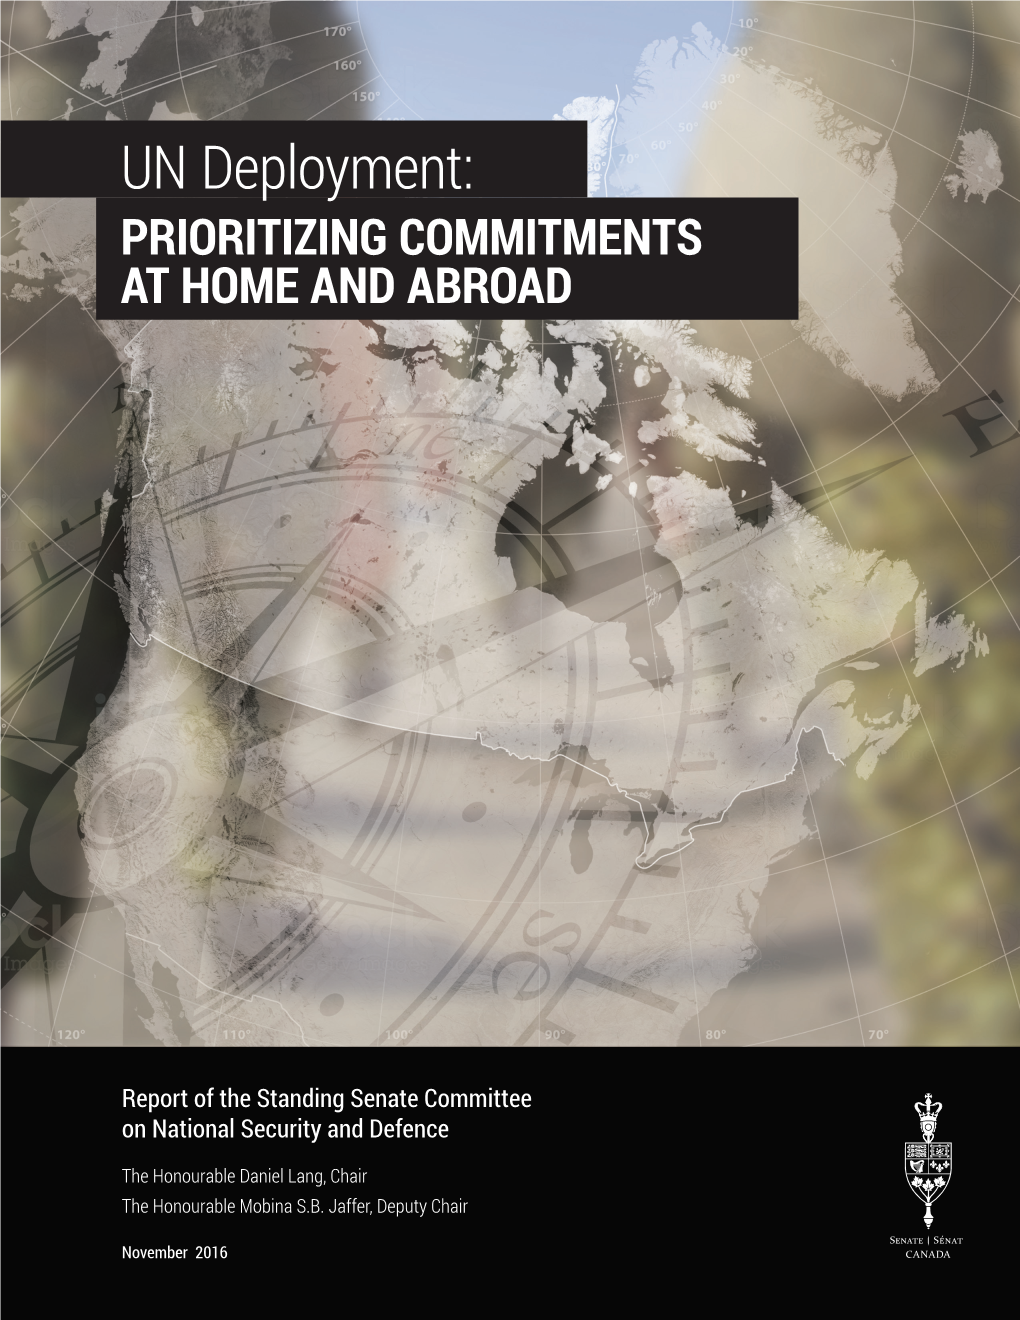 UN Deployment: PRIORITIZING COMMITMENTS at HOME and ABROAD